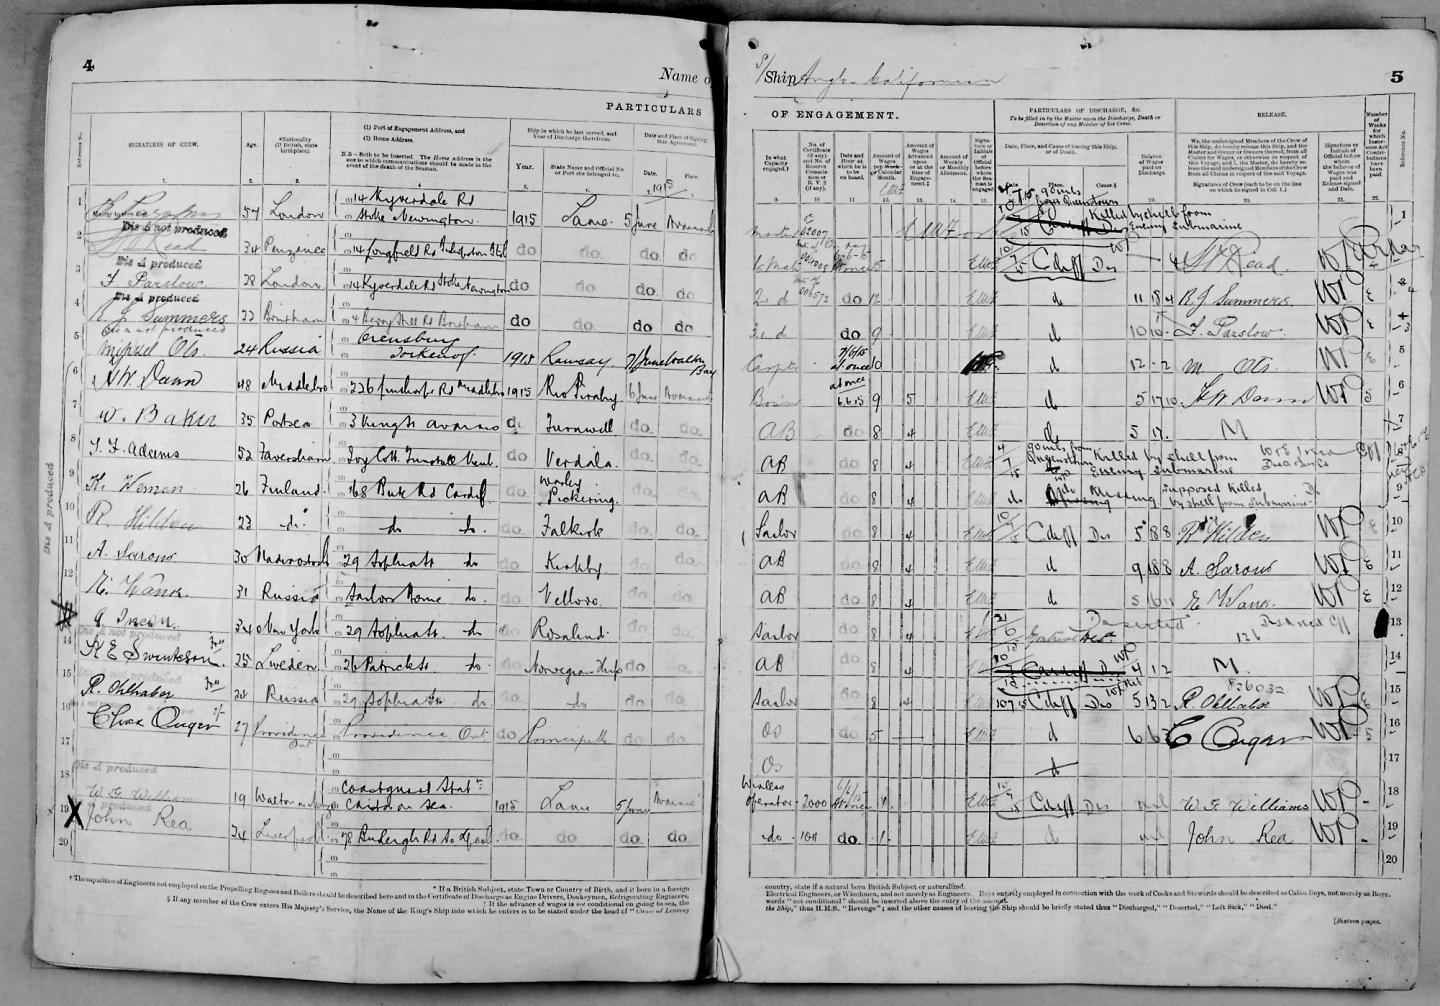 Crew List from the Anglo Californian featuring seamen killed by a shell from an enemy submarine